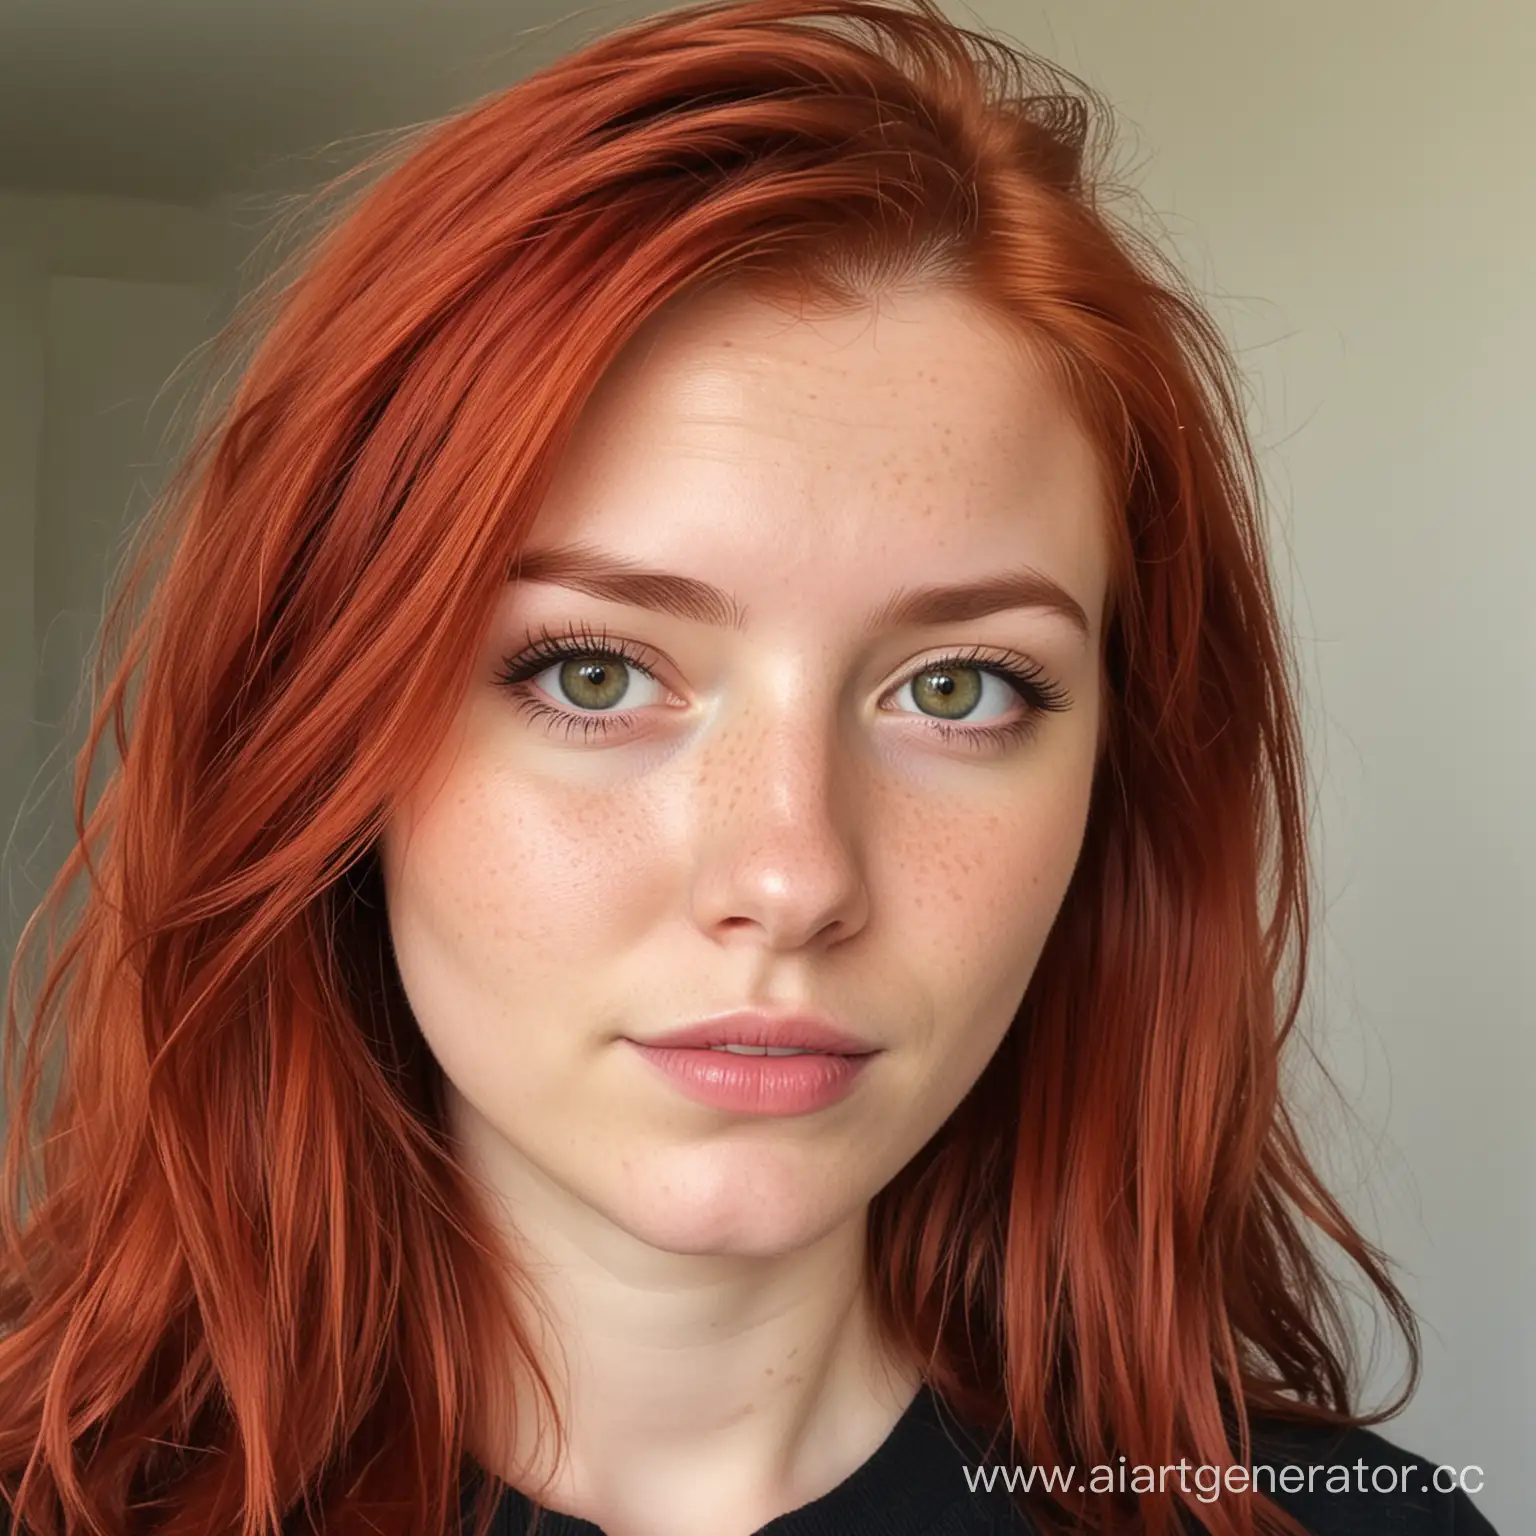 Portrait-of-a-23YearOld-RedHaired-Woman